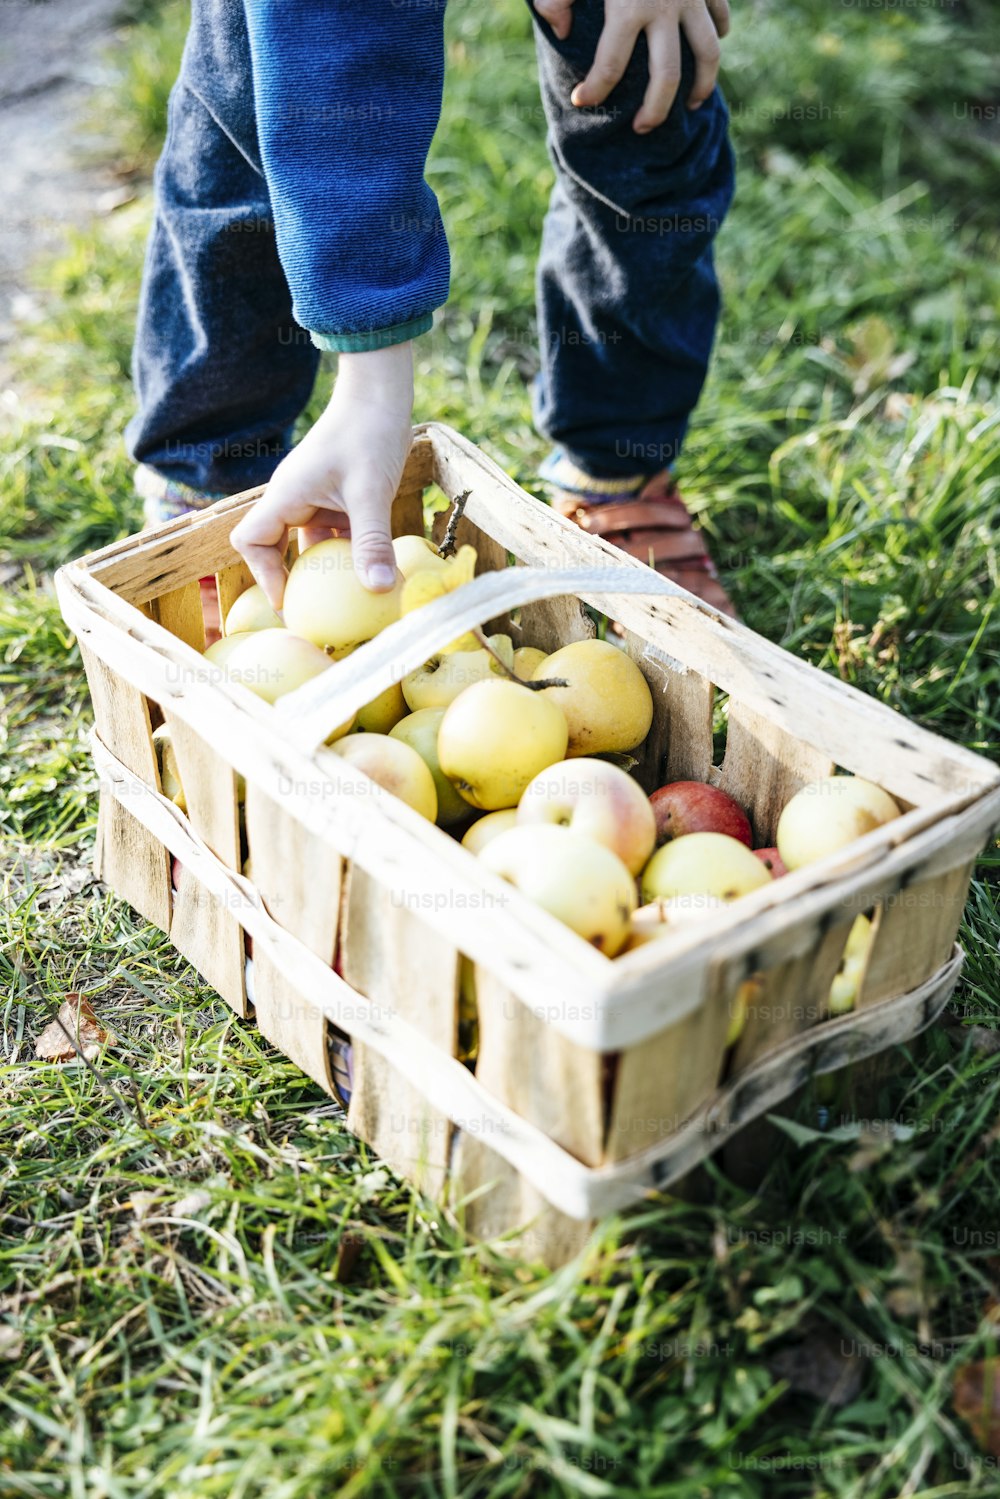 a child picking apples from a basket in the grass